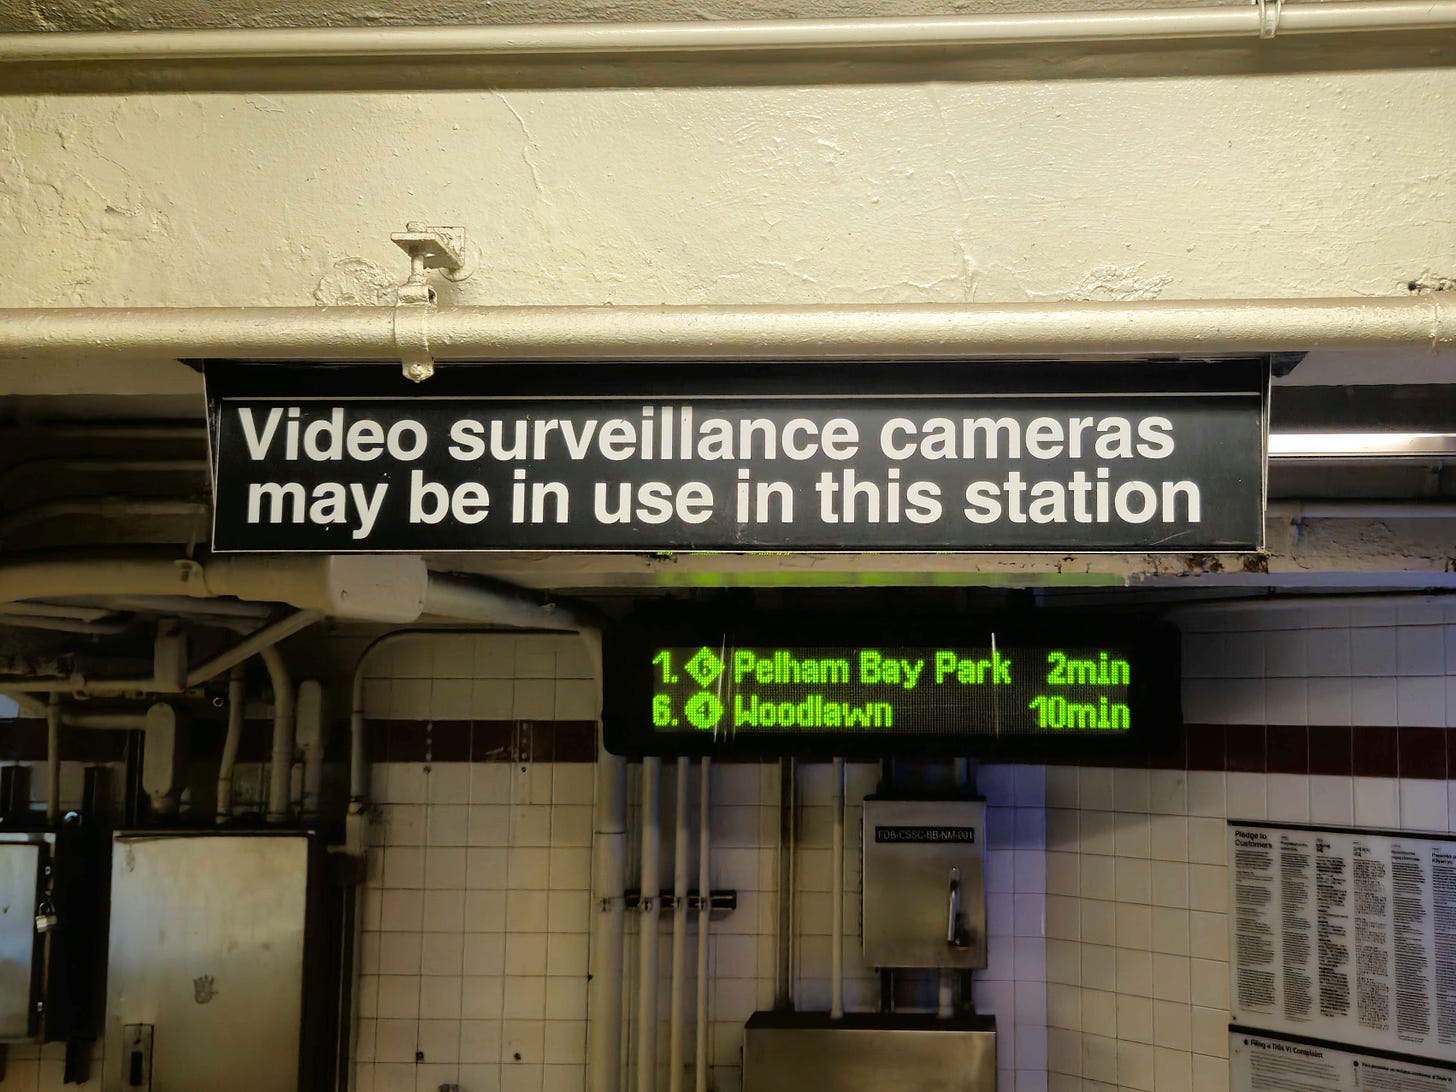 A photograph of an MTA sign in a subway station that says "Video surveillance cameras may be in use in this station."